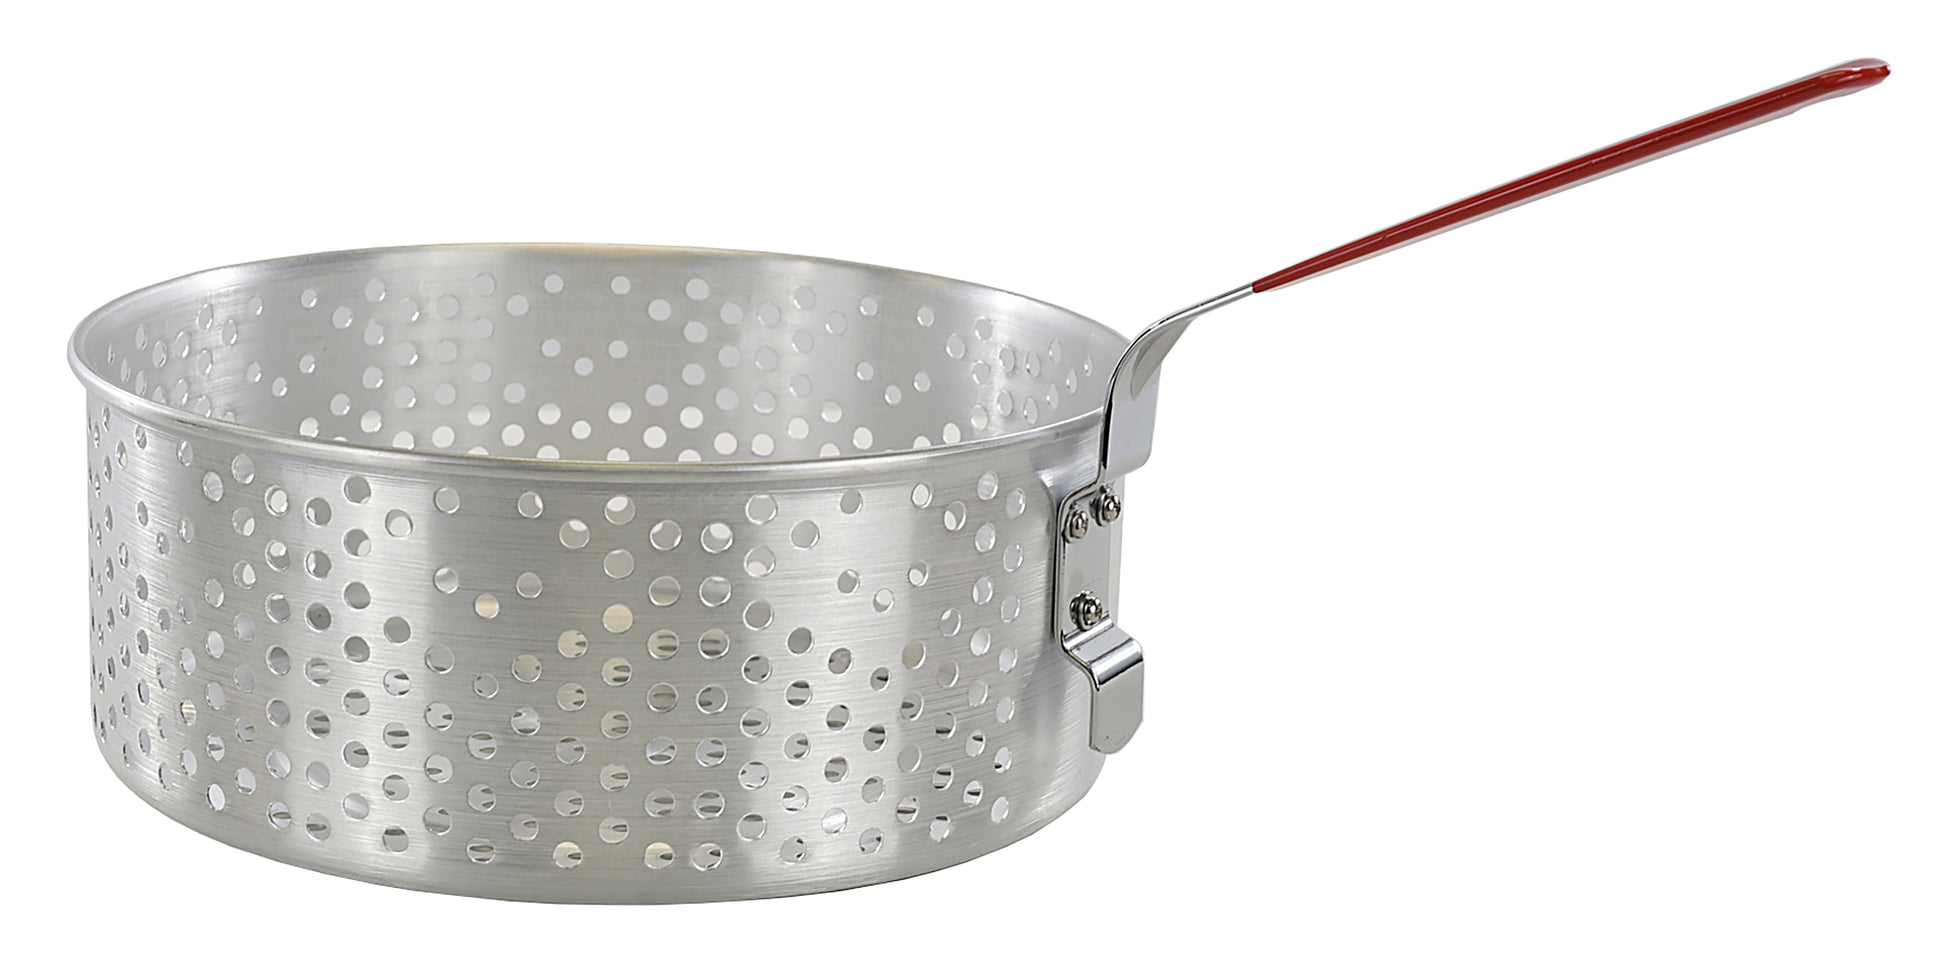 LoCo COOKERS 30-Quart Aluminum Stock Pot and Basket in the Cooking